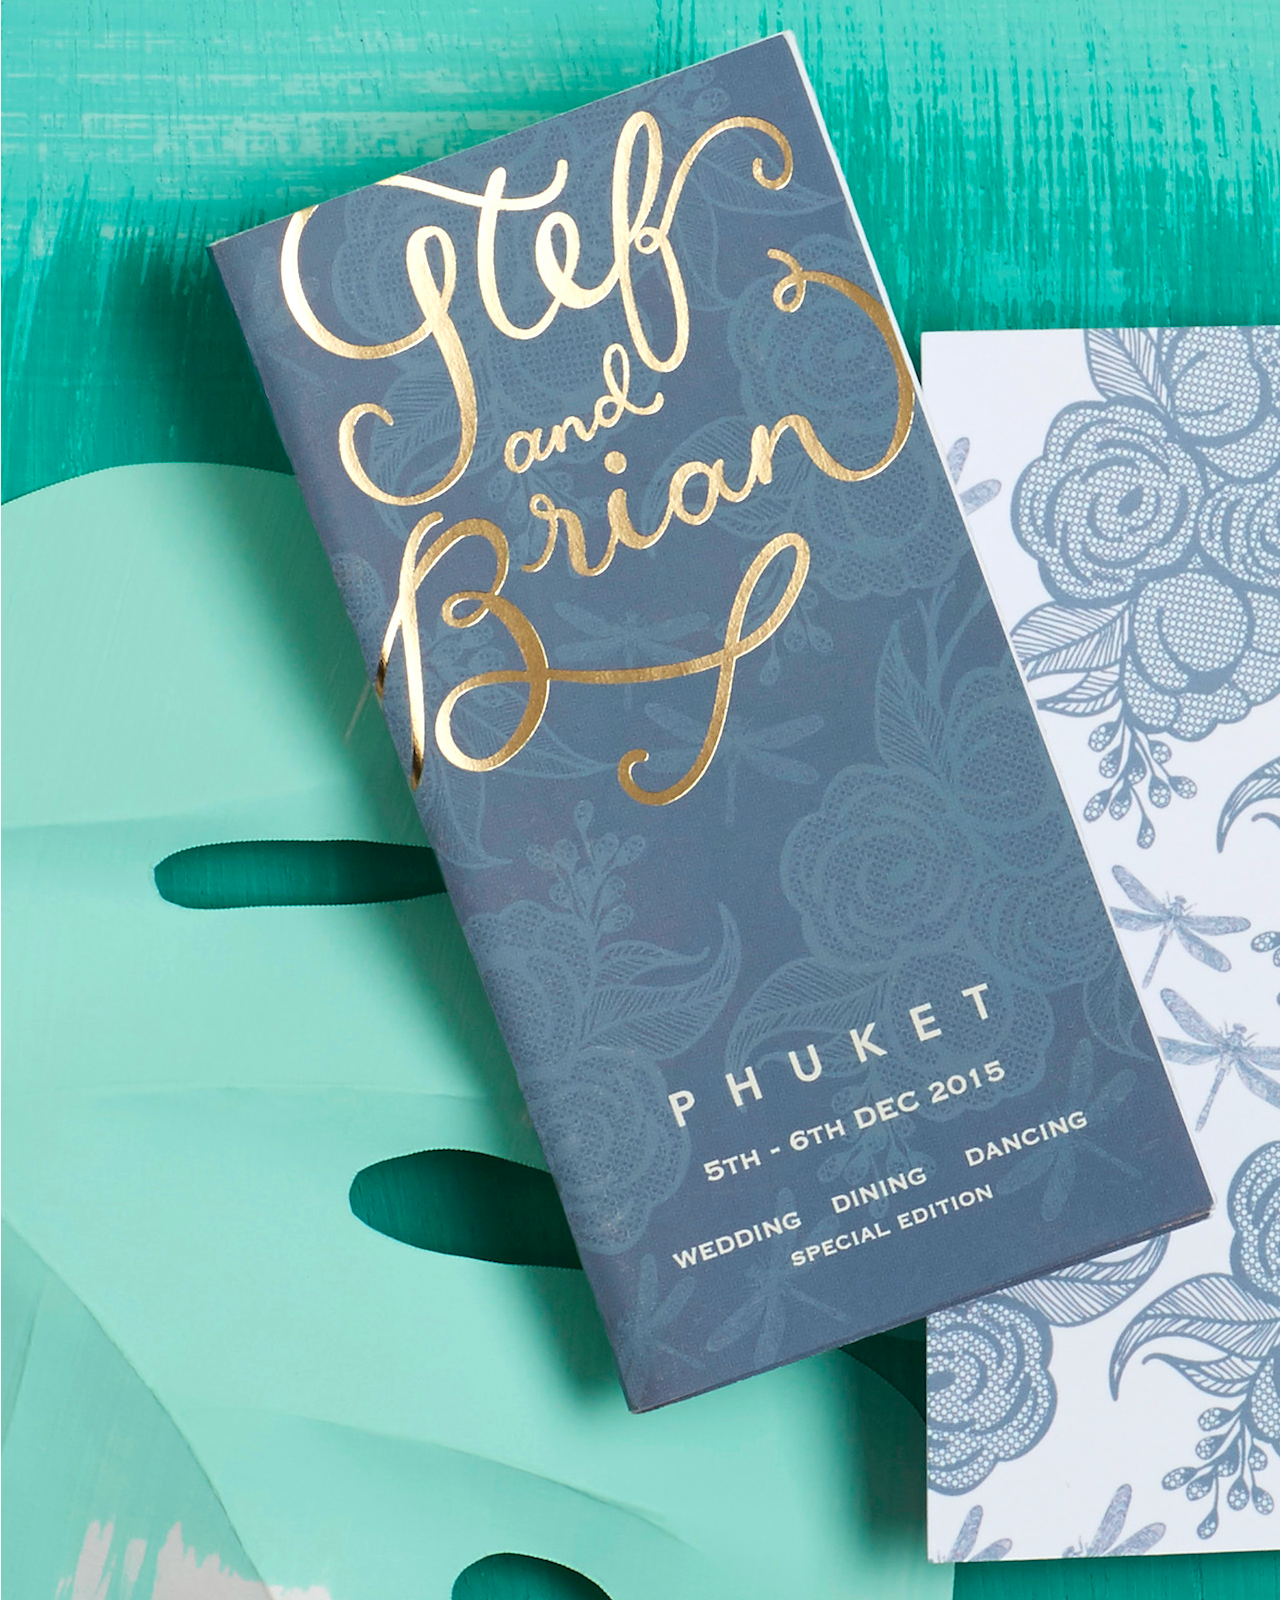 Tropical Turquoise and Gold Foil Wedding Invitations by Berin Made